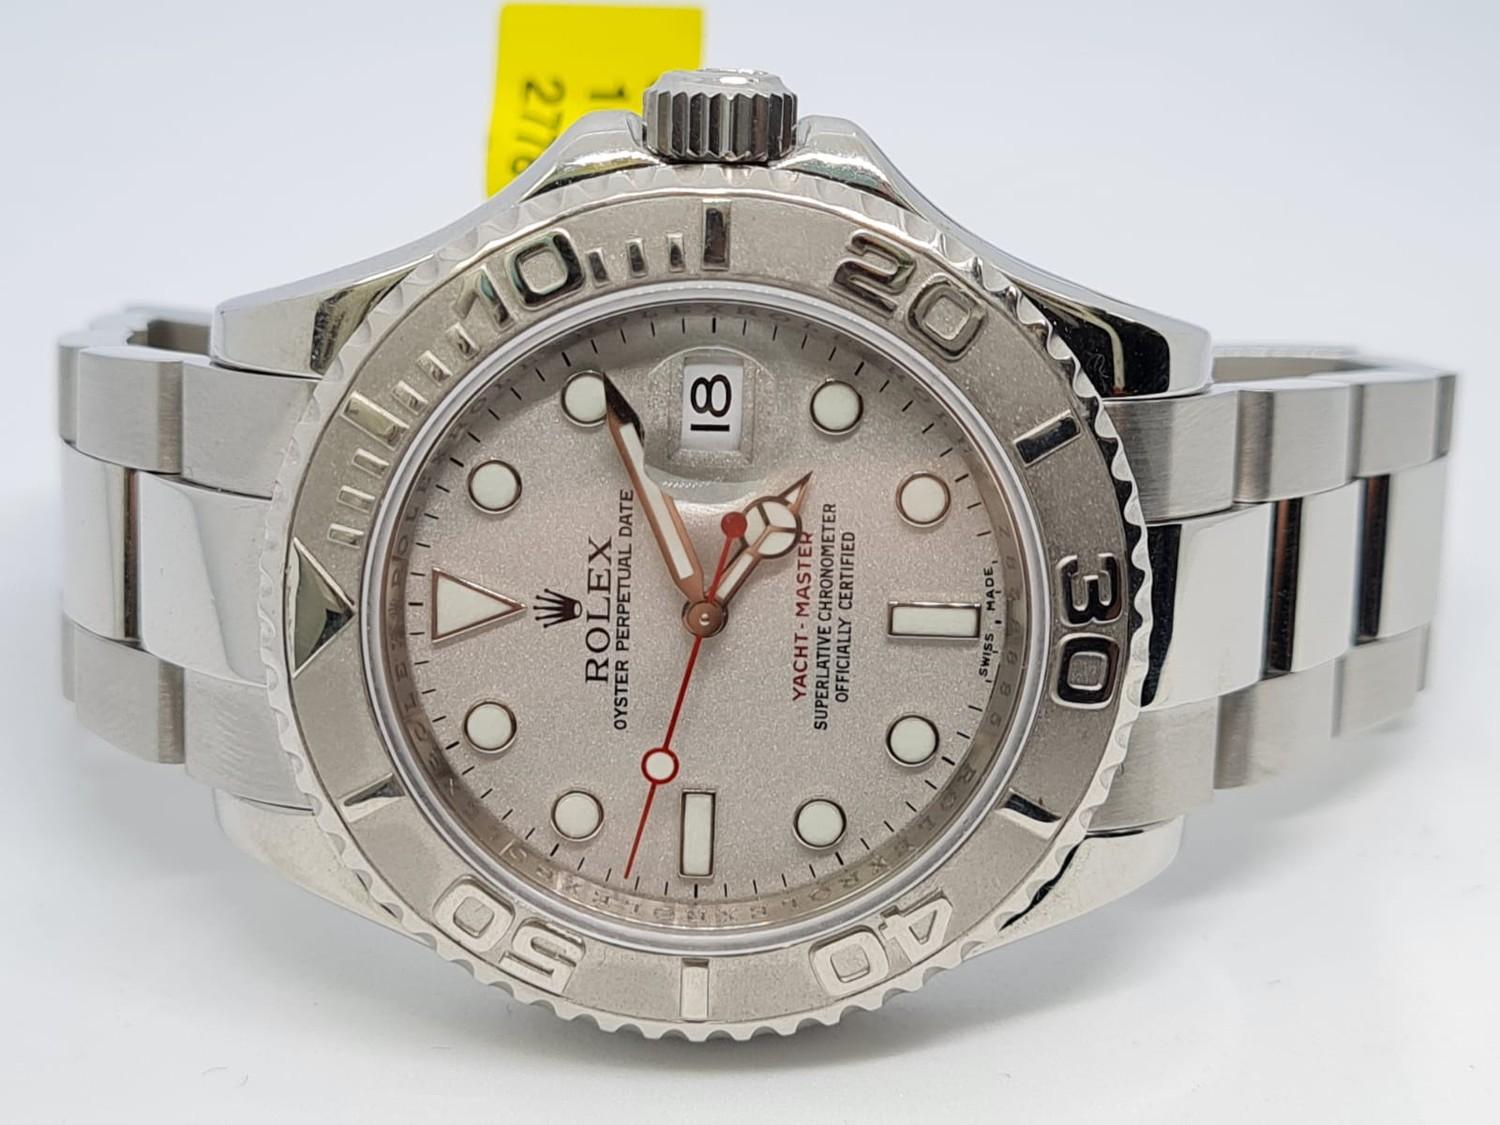 Rolex Yacht-Master Perpetual Date Watch Platinum Bezel, 40mm face Year 2008. Come with box no